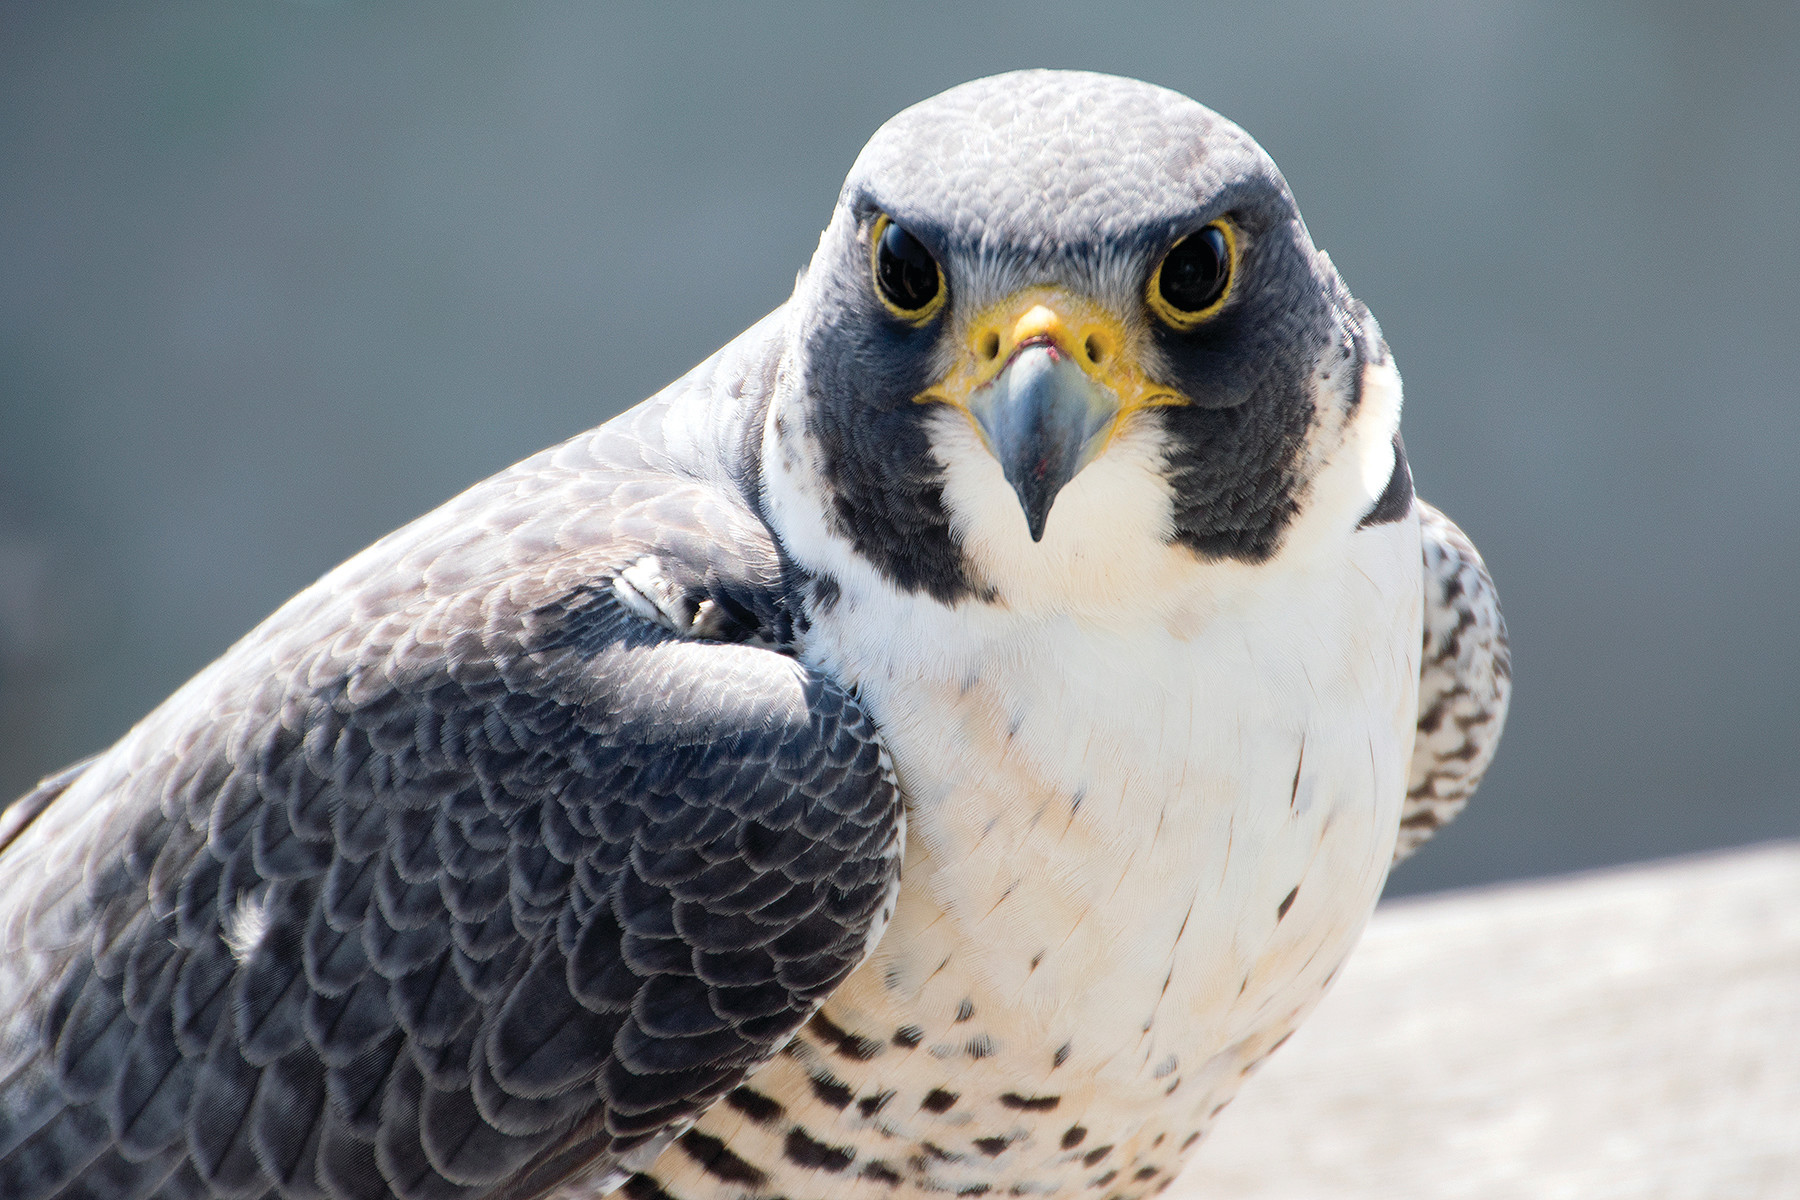 Peregrine falcons might have the most enviable view in the town from their nest atop the Superman Building